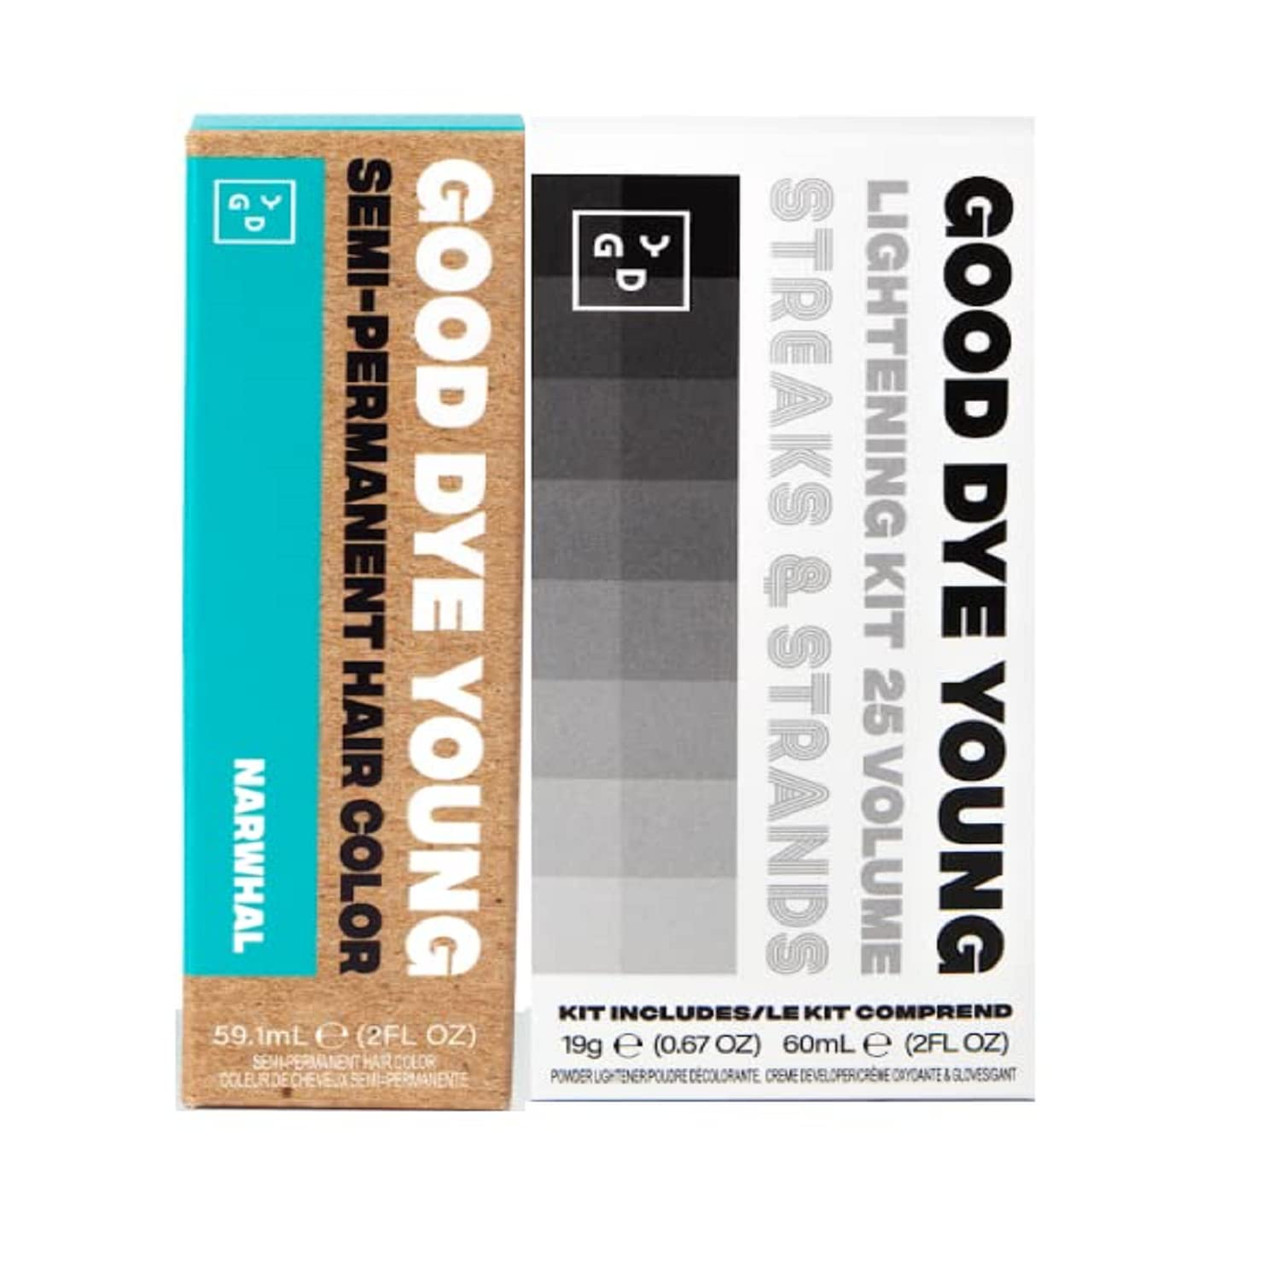 Good Dye Young Streaks and Strands Semi Perm Dye (Narwhal) with Lightening  Kit - 2 oz